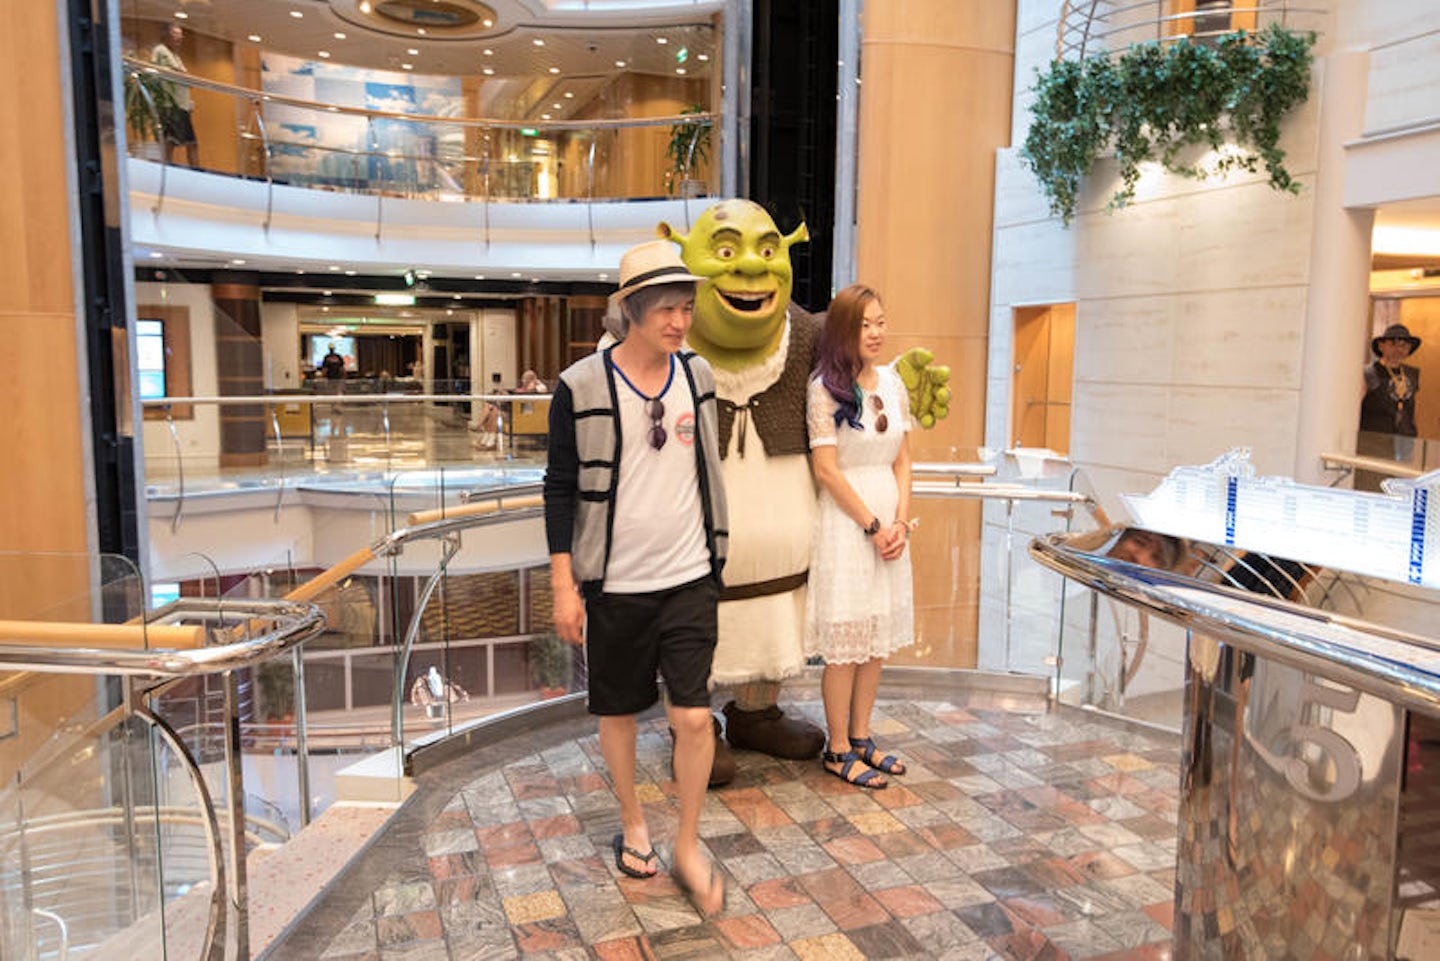 DreamWorks Characters on Freedom of the Seas